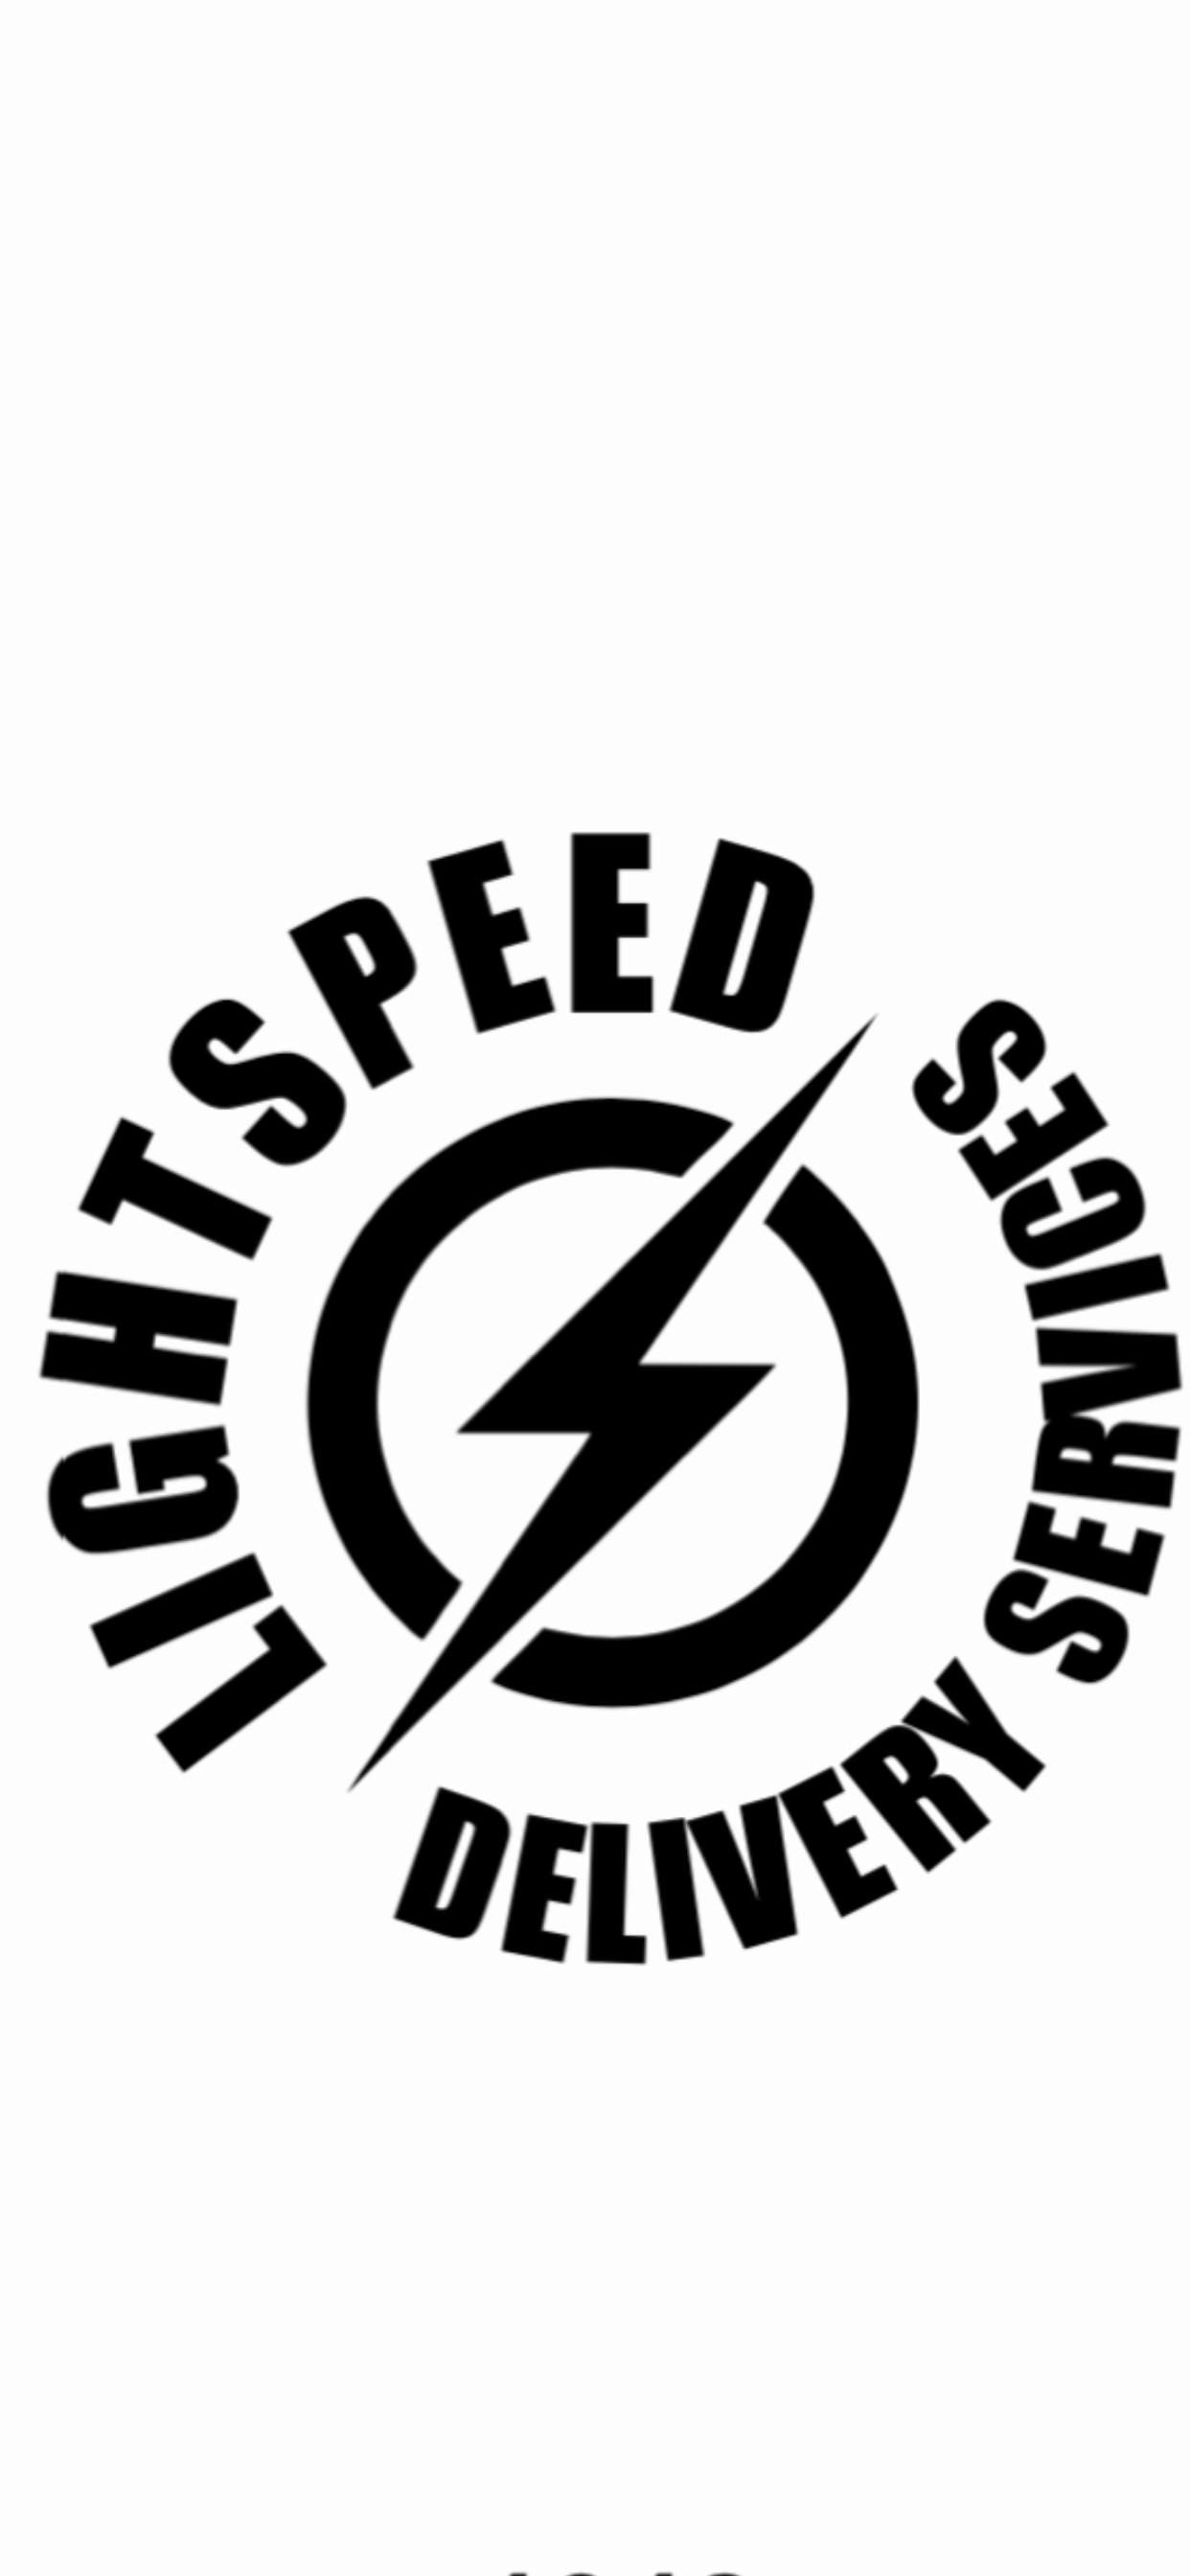 Lightspeed Delivery Services